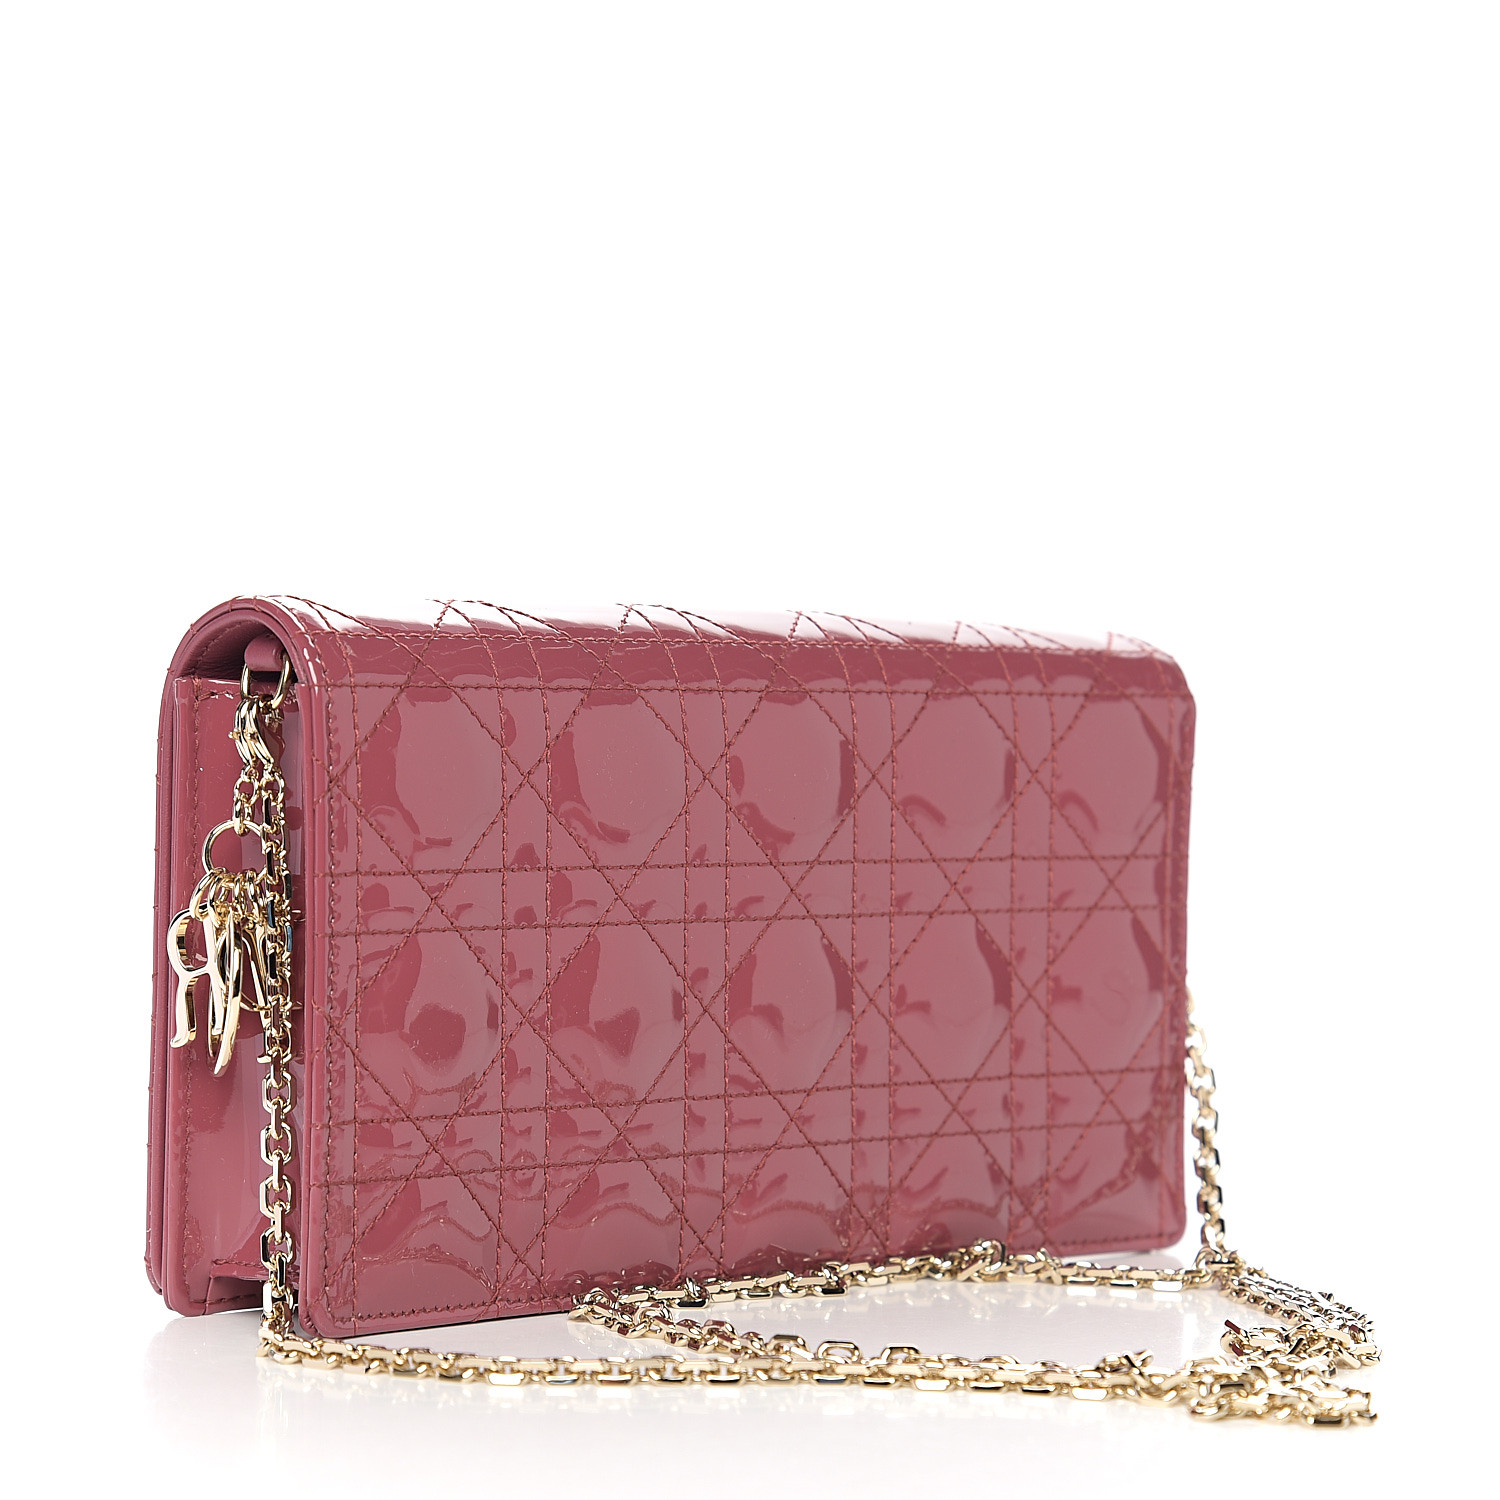 CHRISTIAN DIOR Patent Cannage Lady Dior Clutch Pink 555135